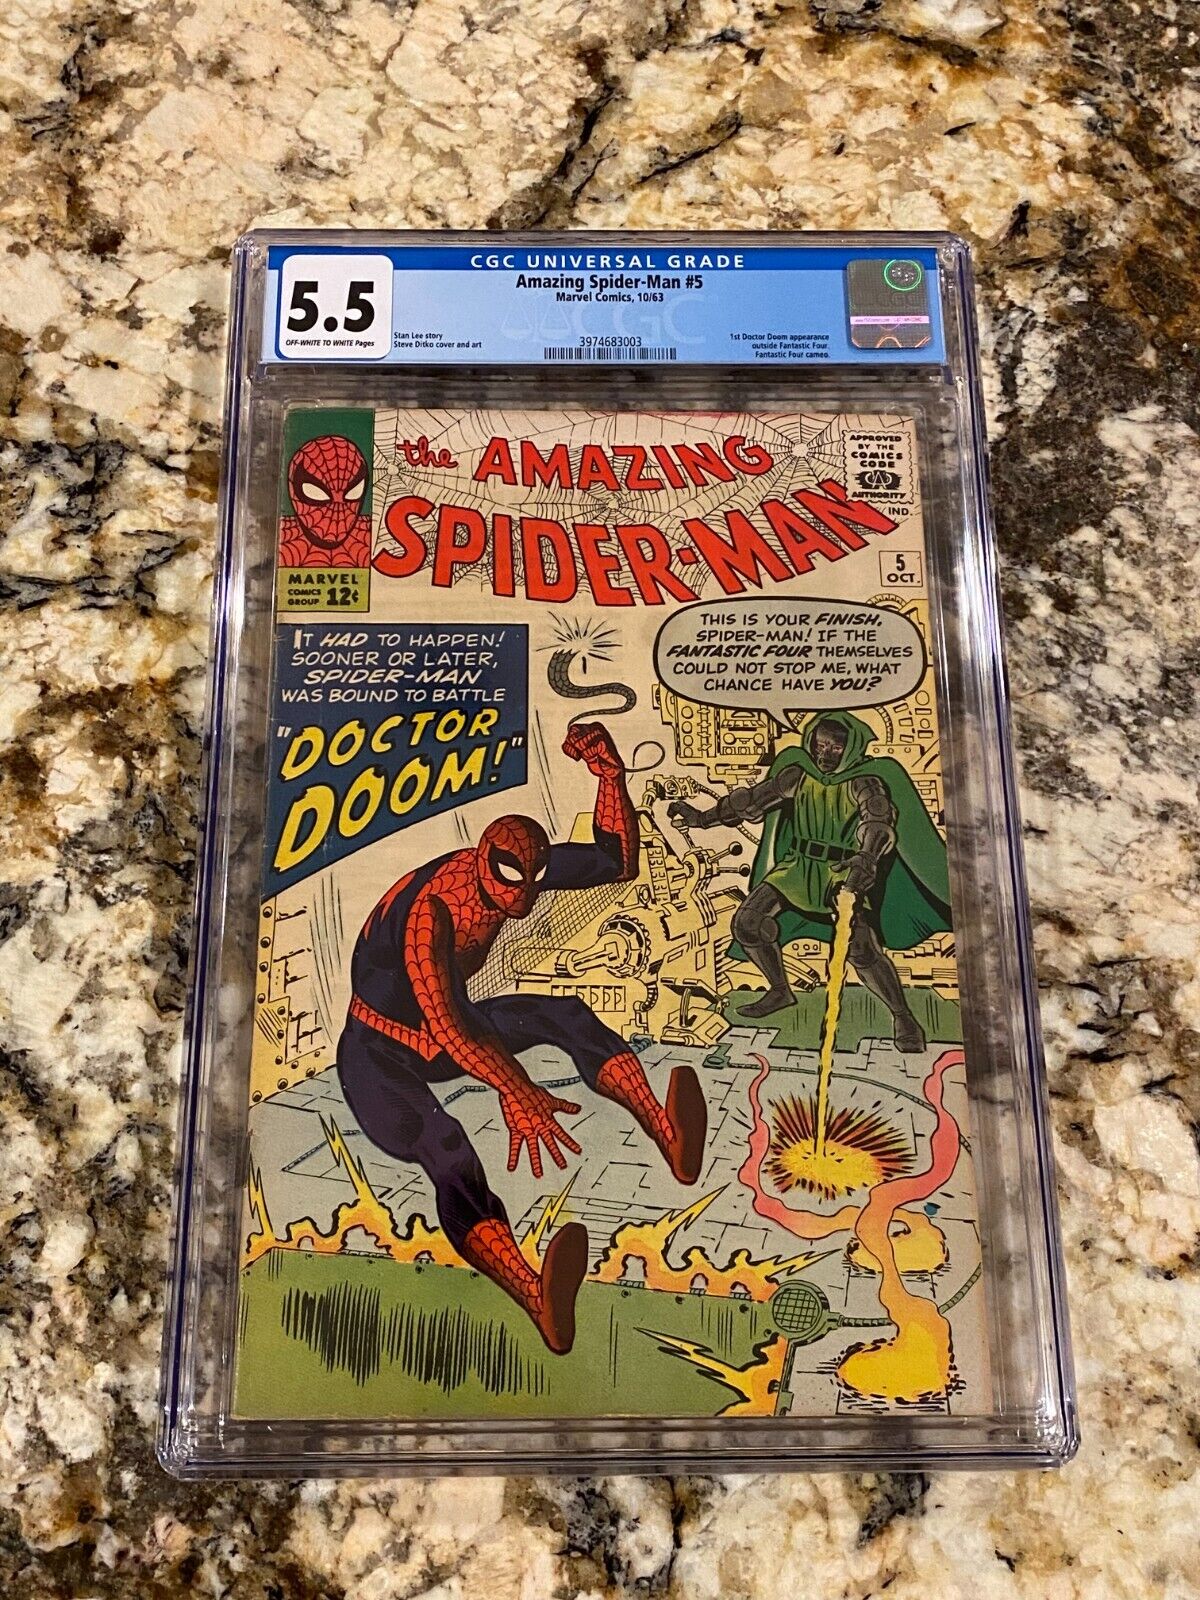 AMAZING SPIDER-MAN #5 CGC 5.5 OW/WH PAGES HI END 1ST DR DOOM CROSSOVER MCU KEY